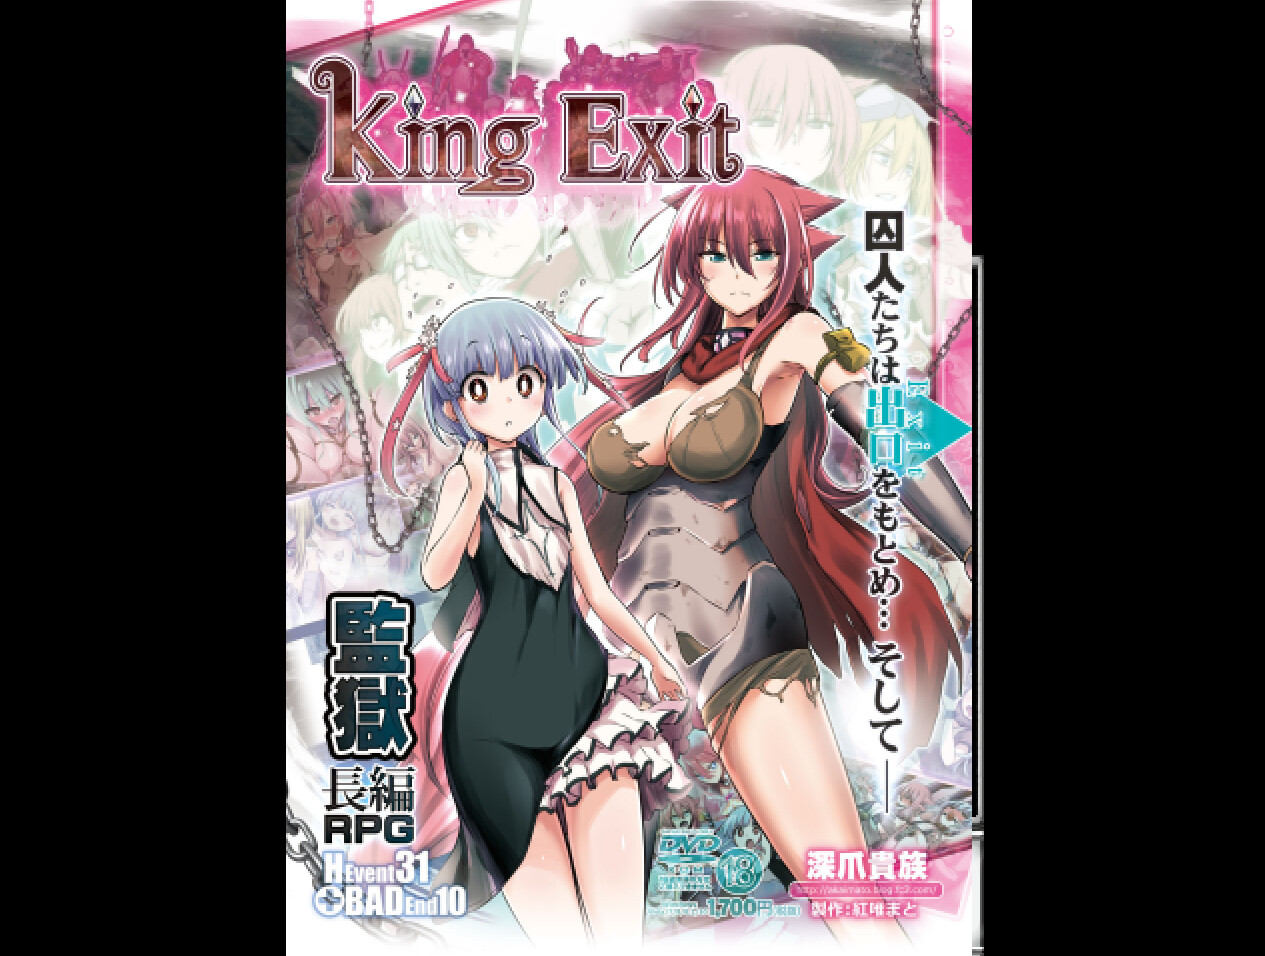 King exit 攻略